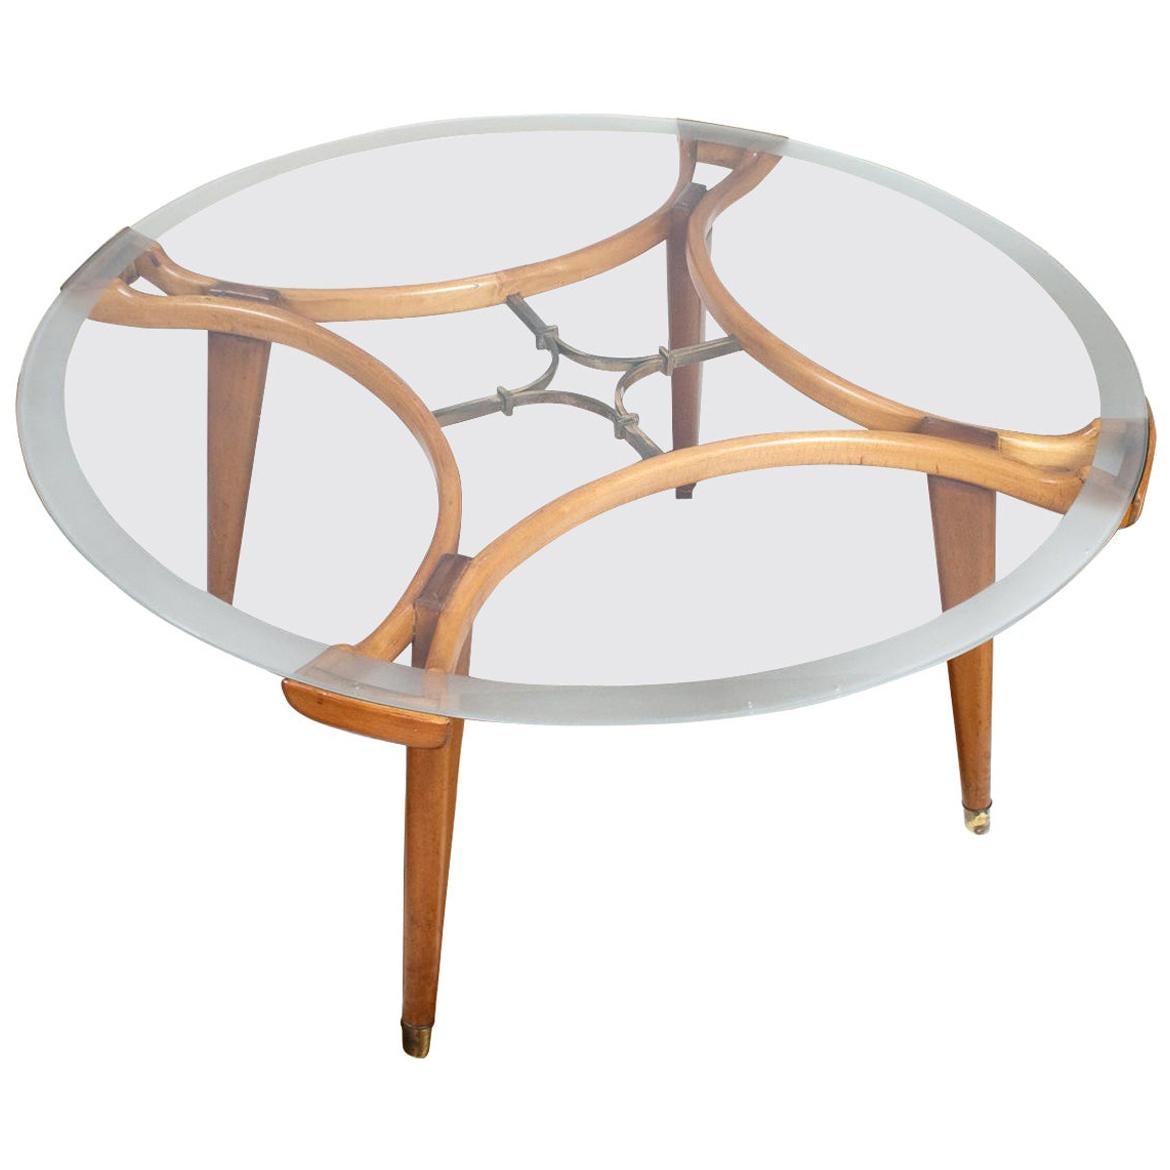 Midcentury Round Coffee Table in Glass and Oak by William Watting for Fristho For Sale